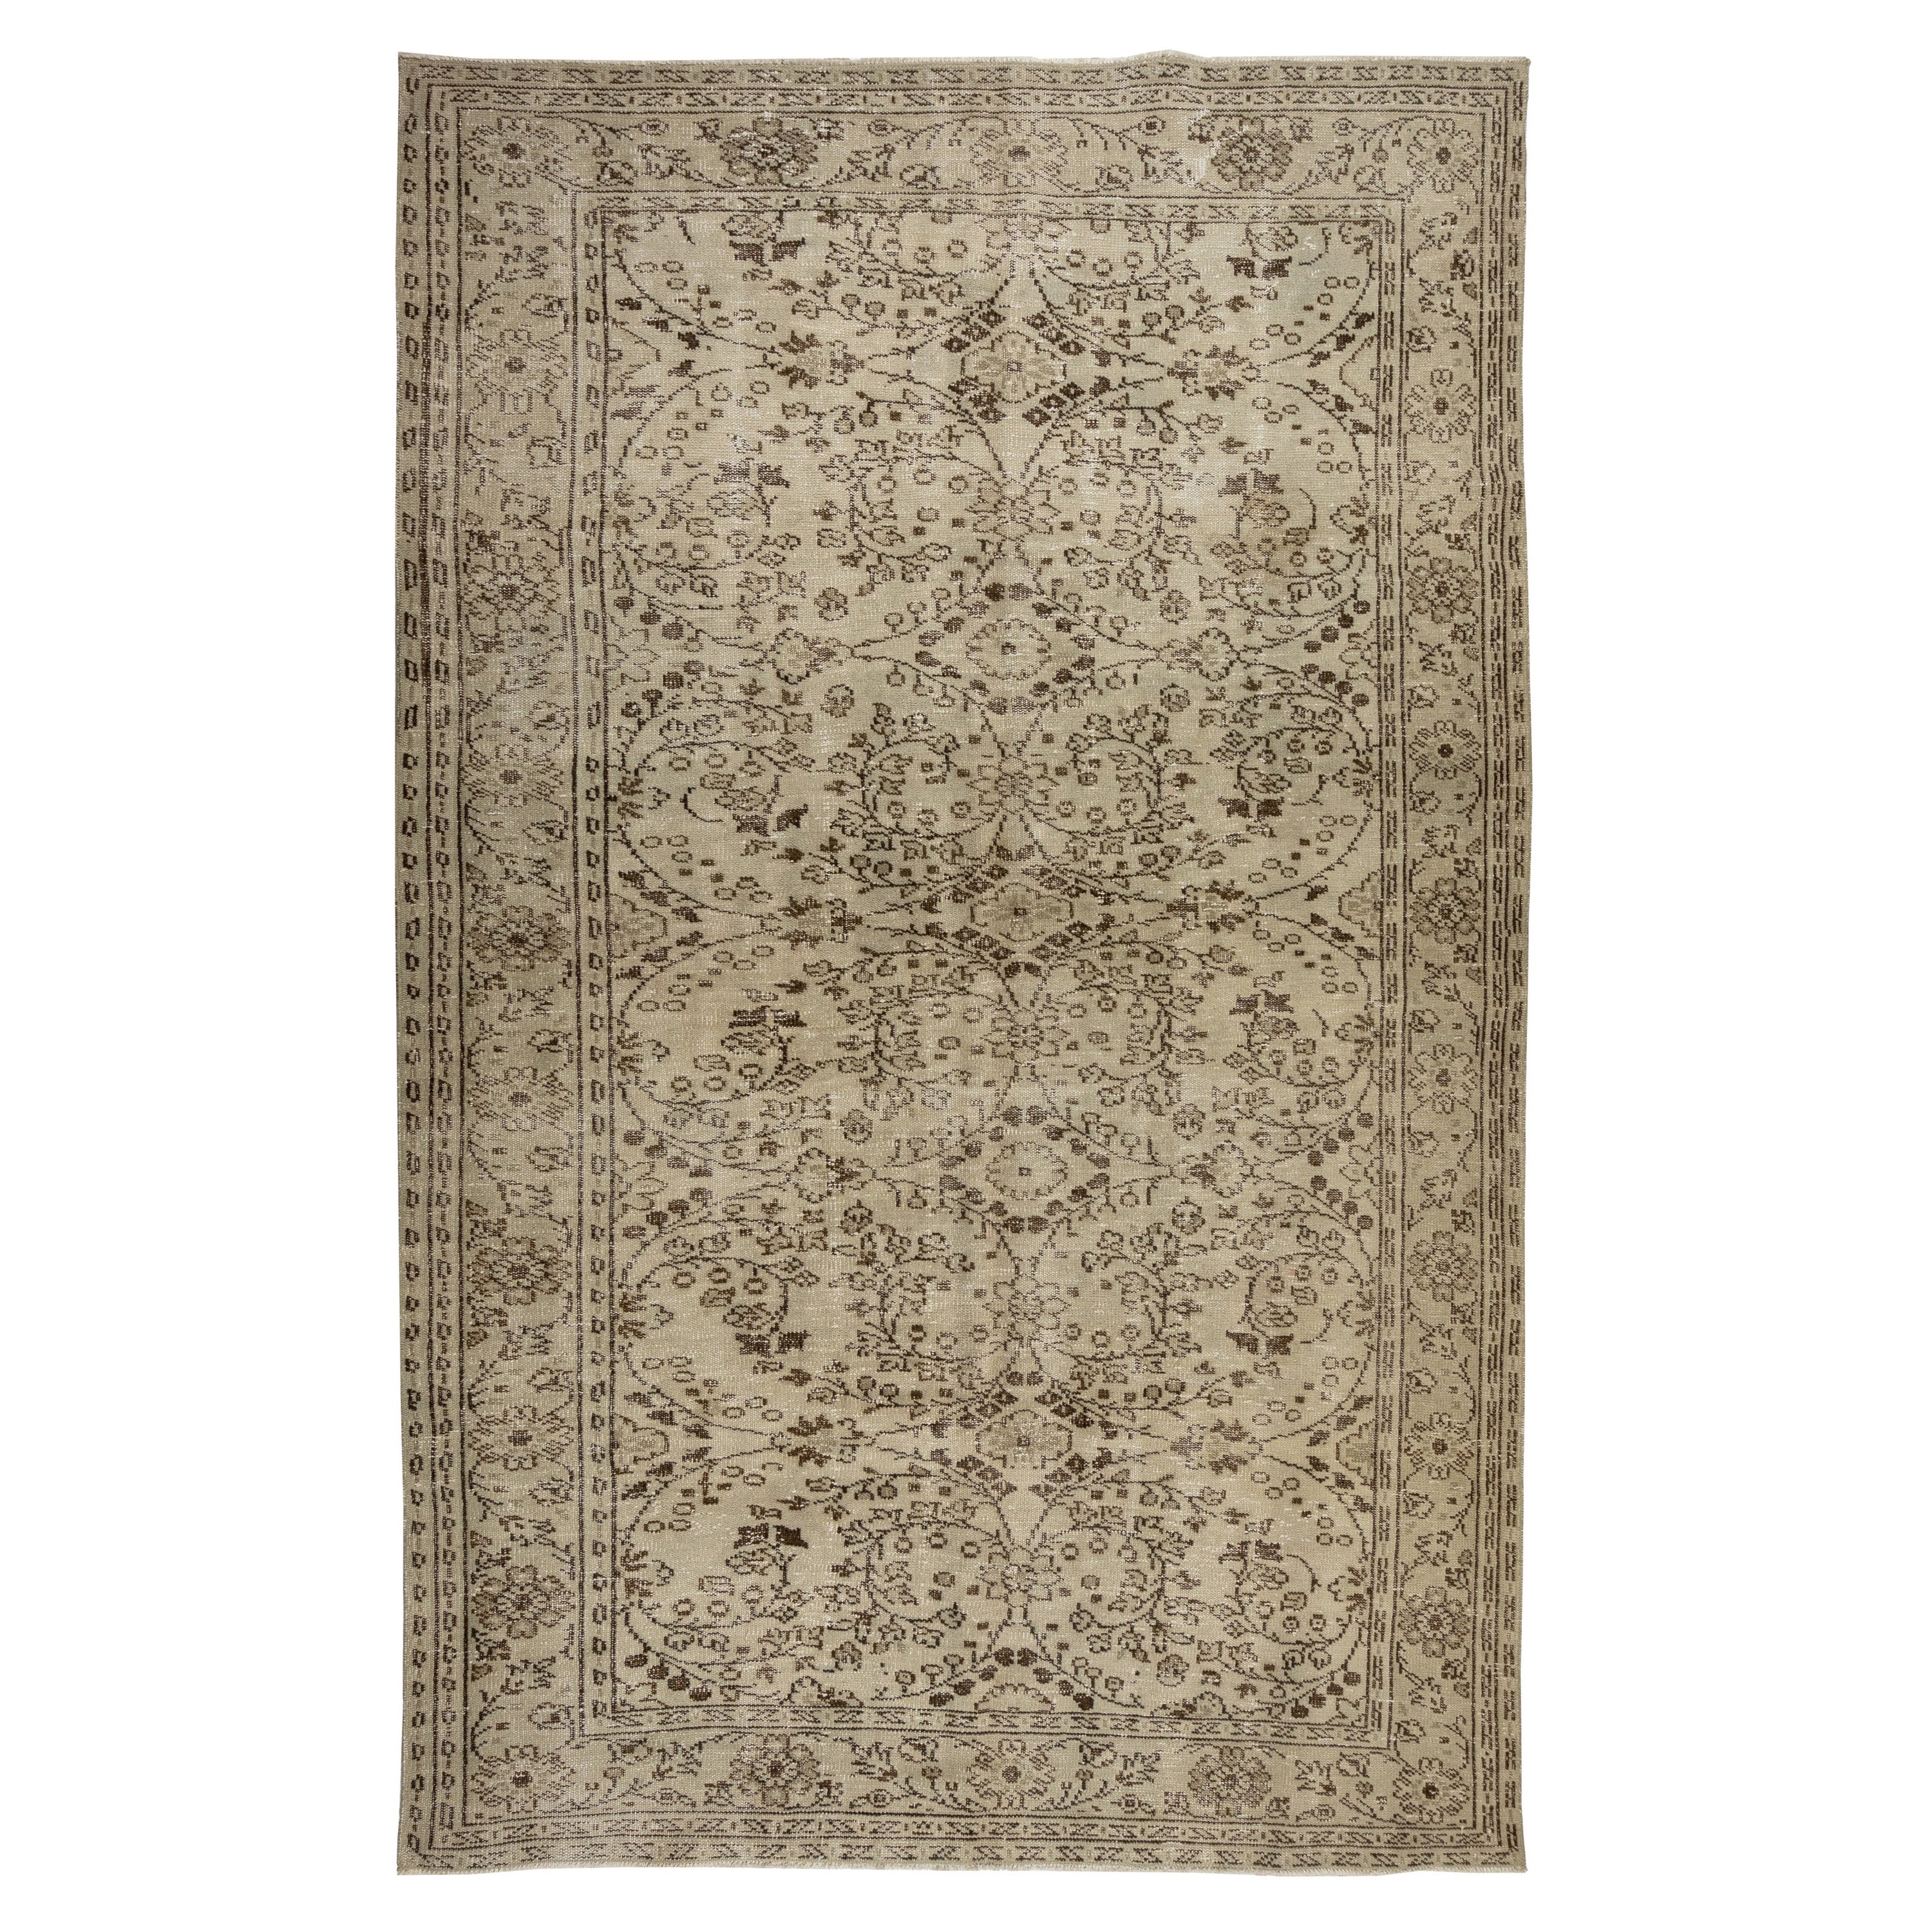 Hand-Knotted 1960's Oushak Area Rug with Floral Design in Beige Colors